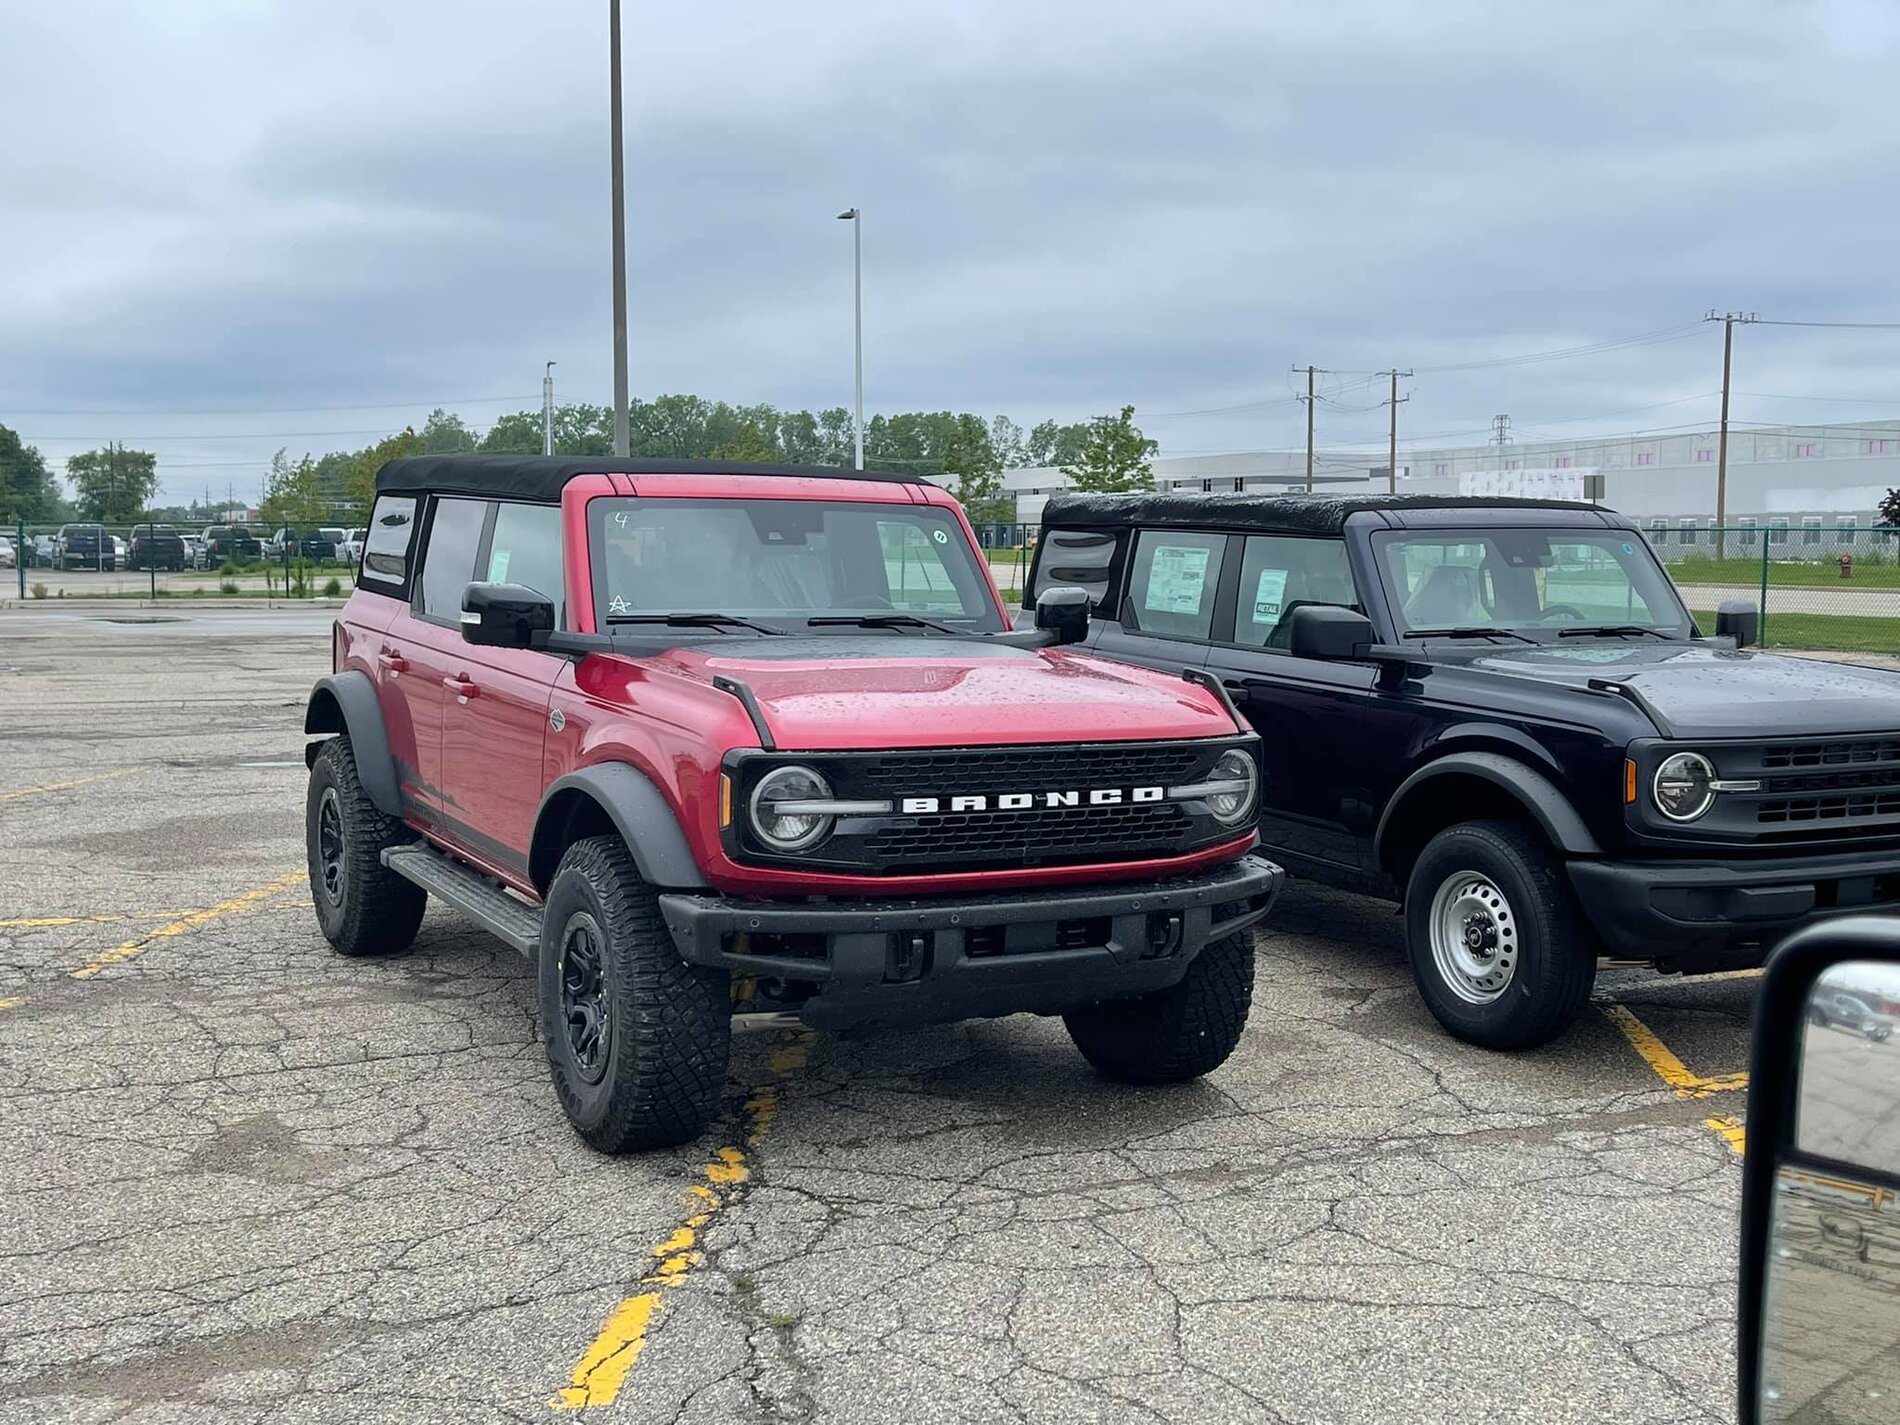 Ford Bronco Wildtrak vs Base Bronco 4-Door Side-by-Side Shows Height and Equipment Difference 2021 Bronco -- Rapid Red Wildtrak + Shadow Black Base 4-Doors 3